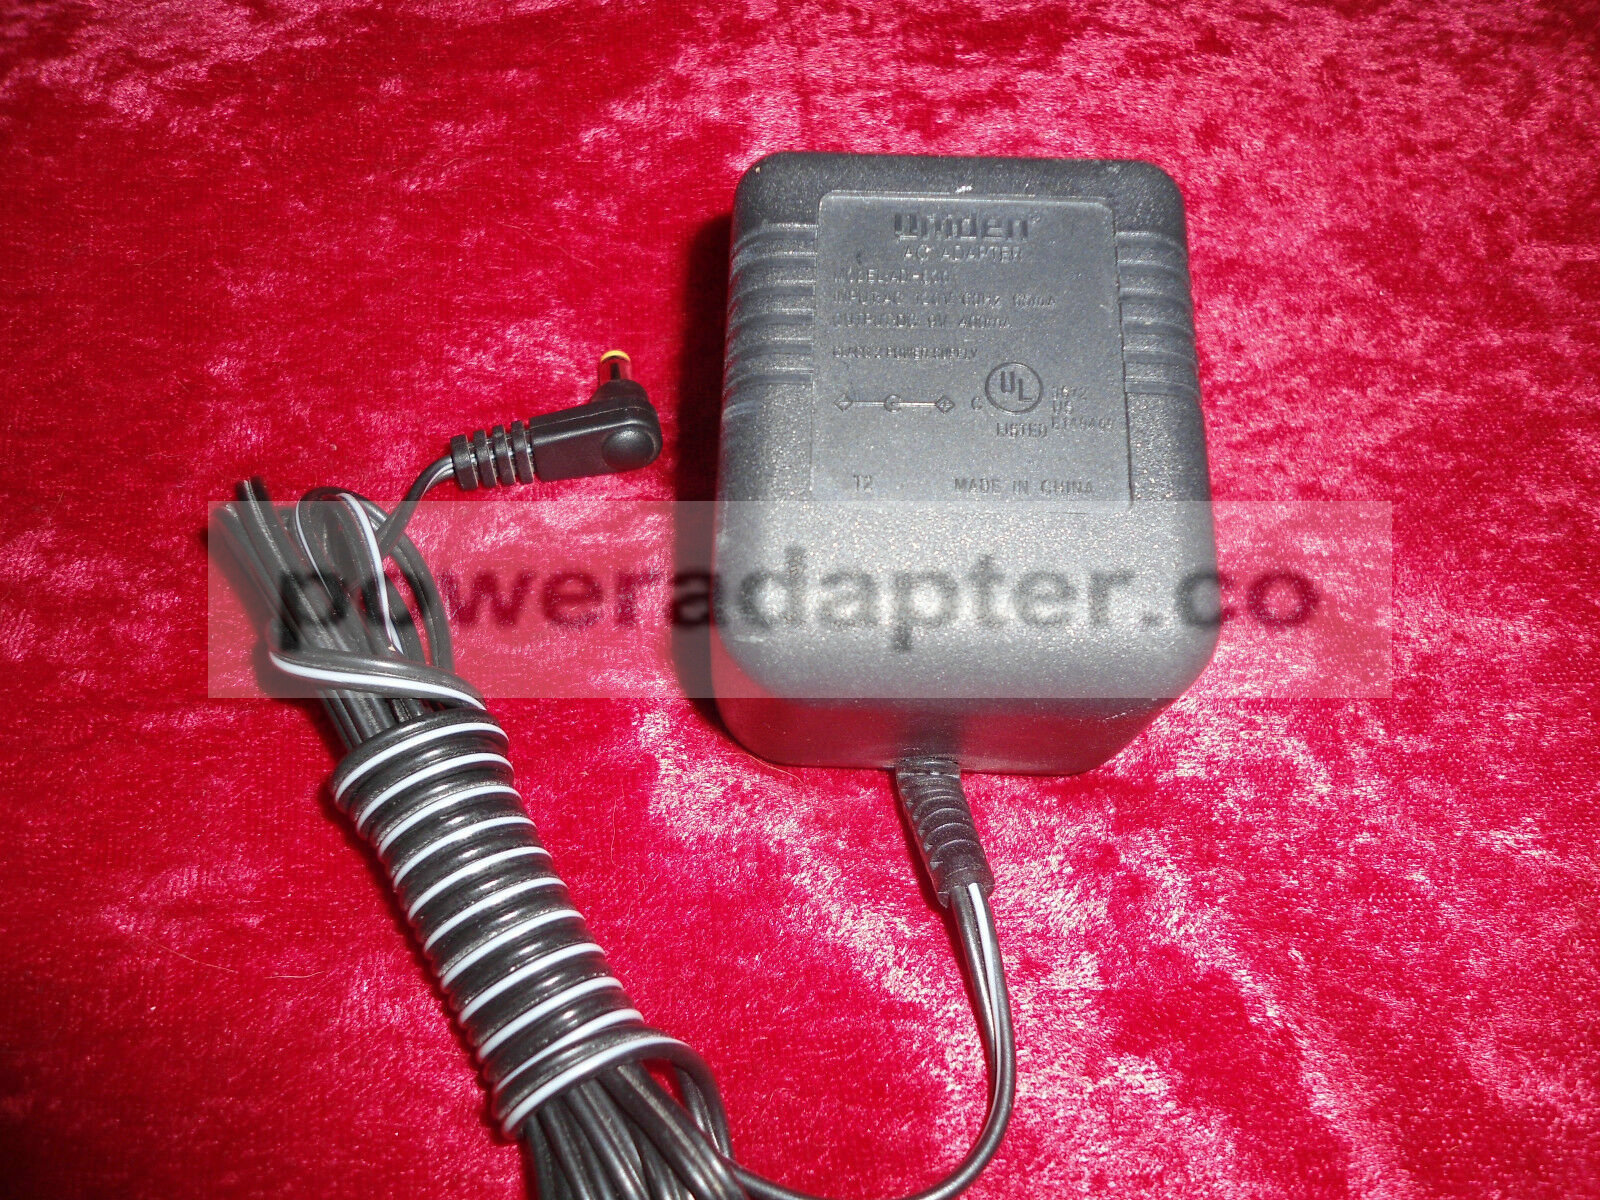 Uniden AD-830 AC Adapter Power Supply 9VDC 400mA Condition: Used: An item that has been used previously. The item m